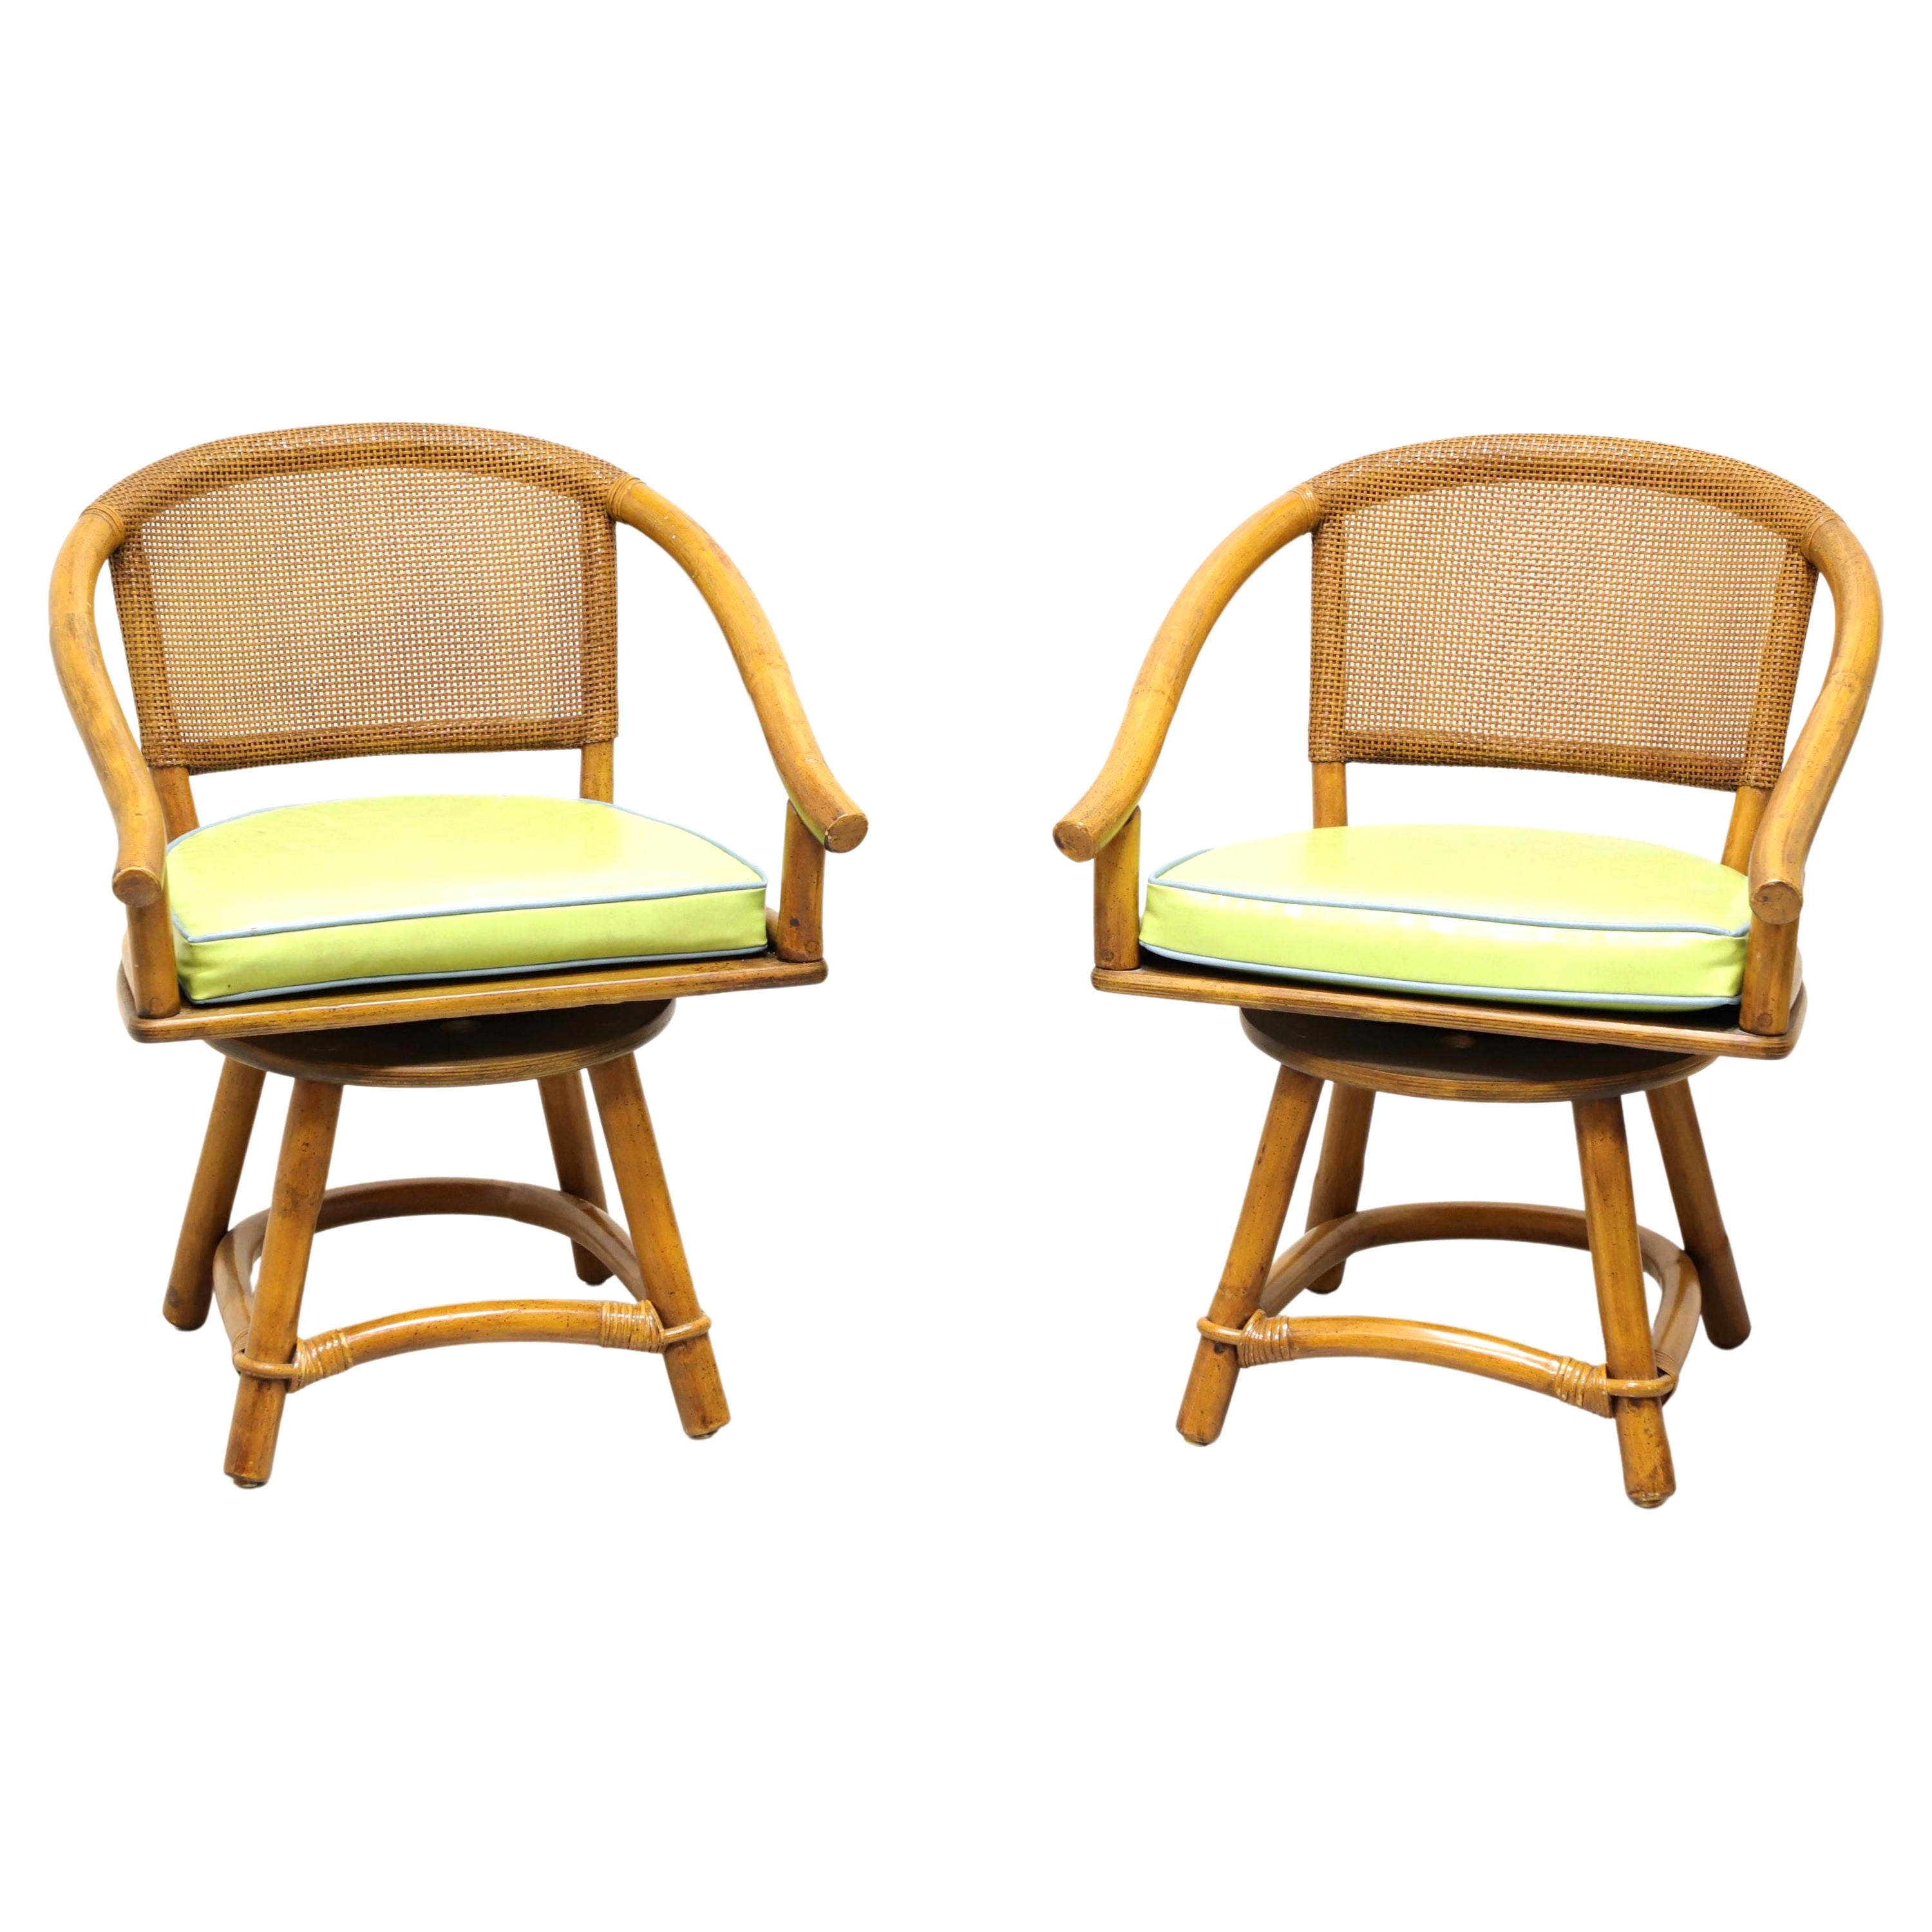 FICKS REED Mid 20th Century Faux Bamboo Rattan Swivel Chairs - Pair A